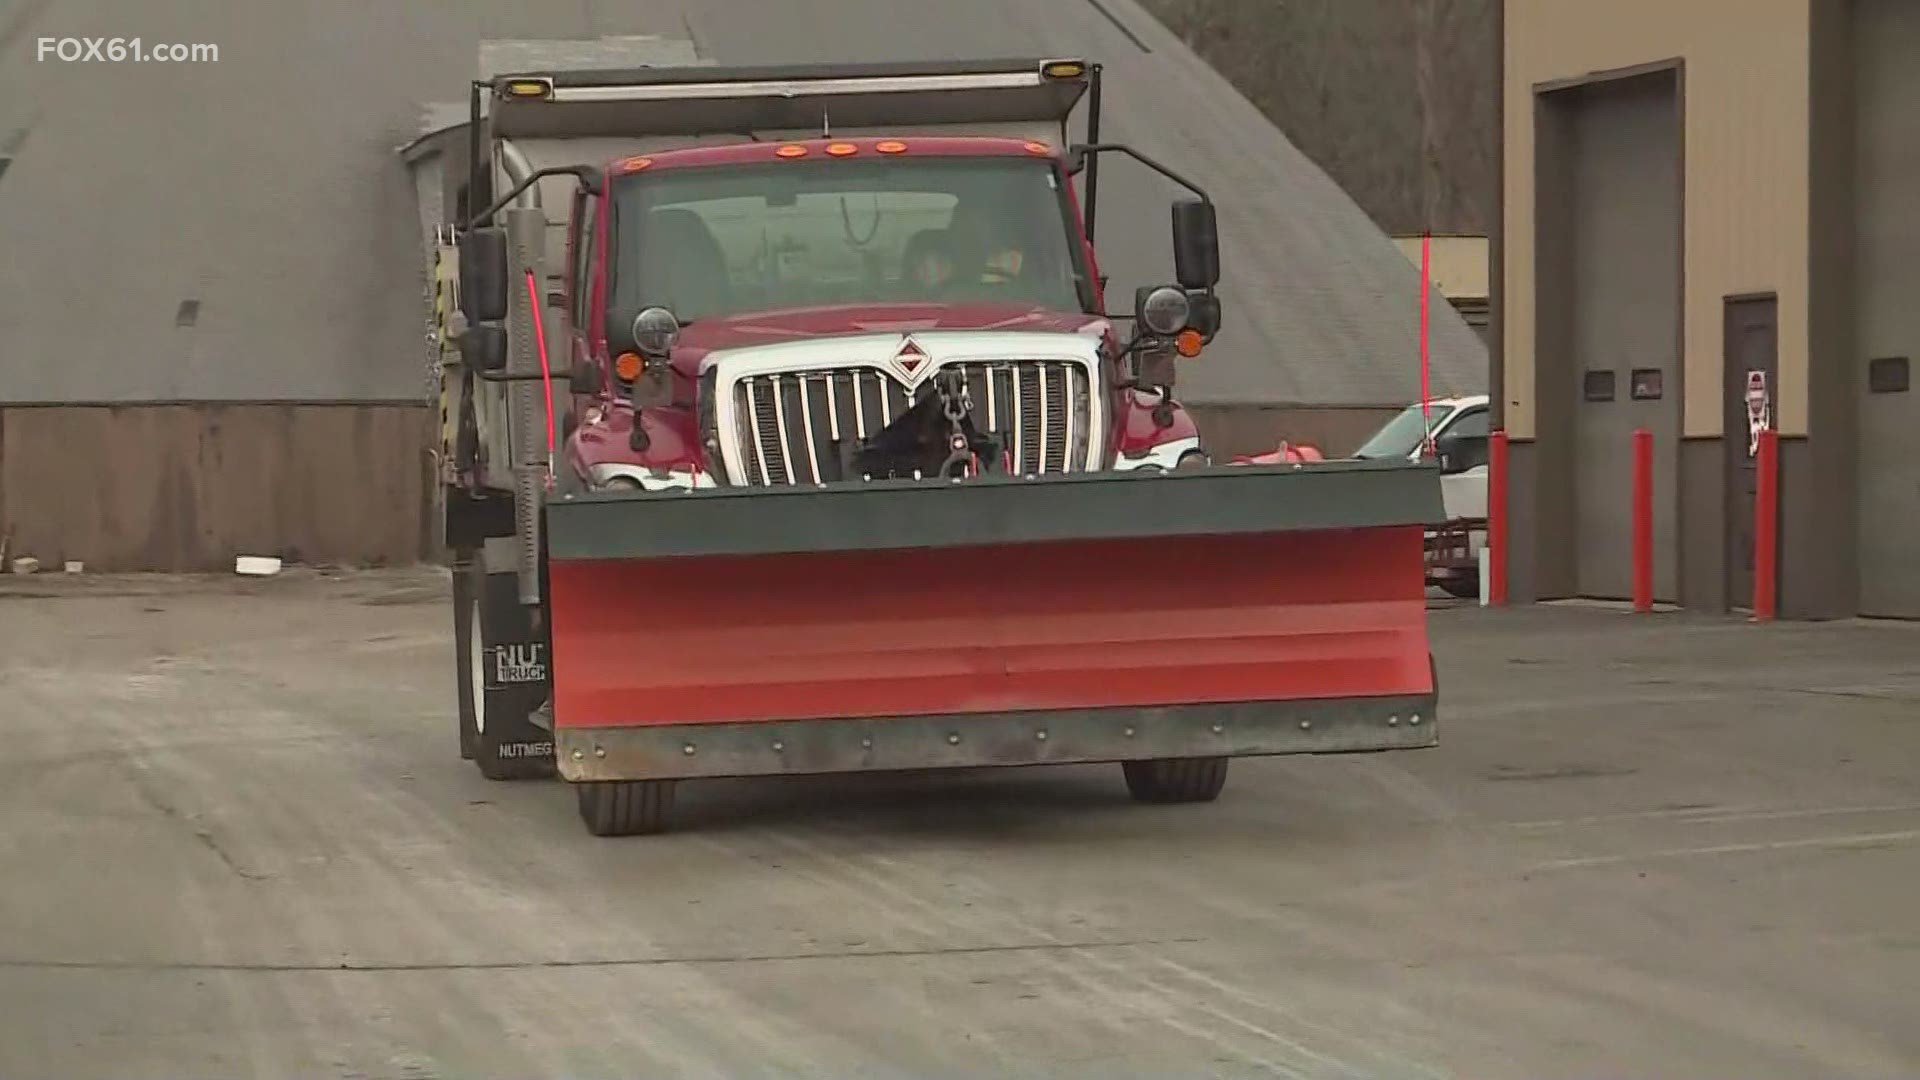 The state has over 600 plows to clear the roads